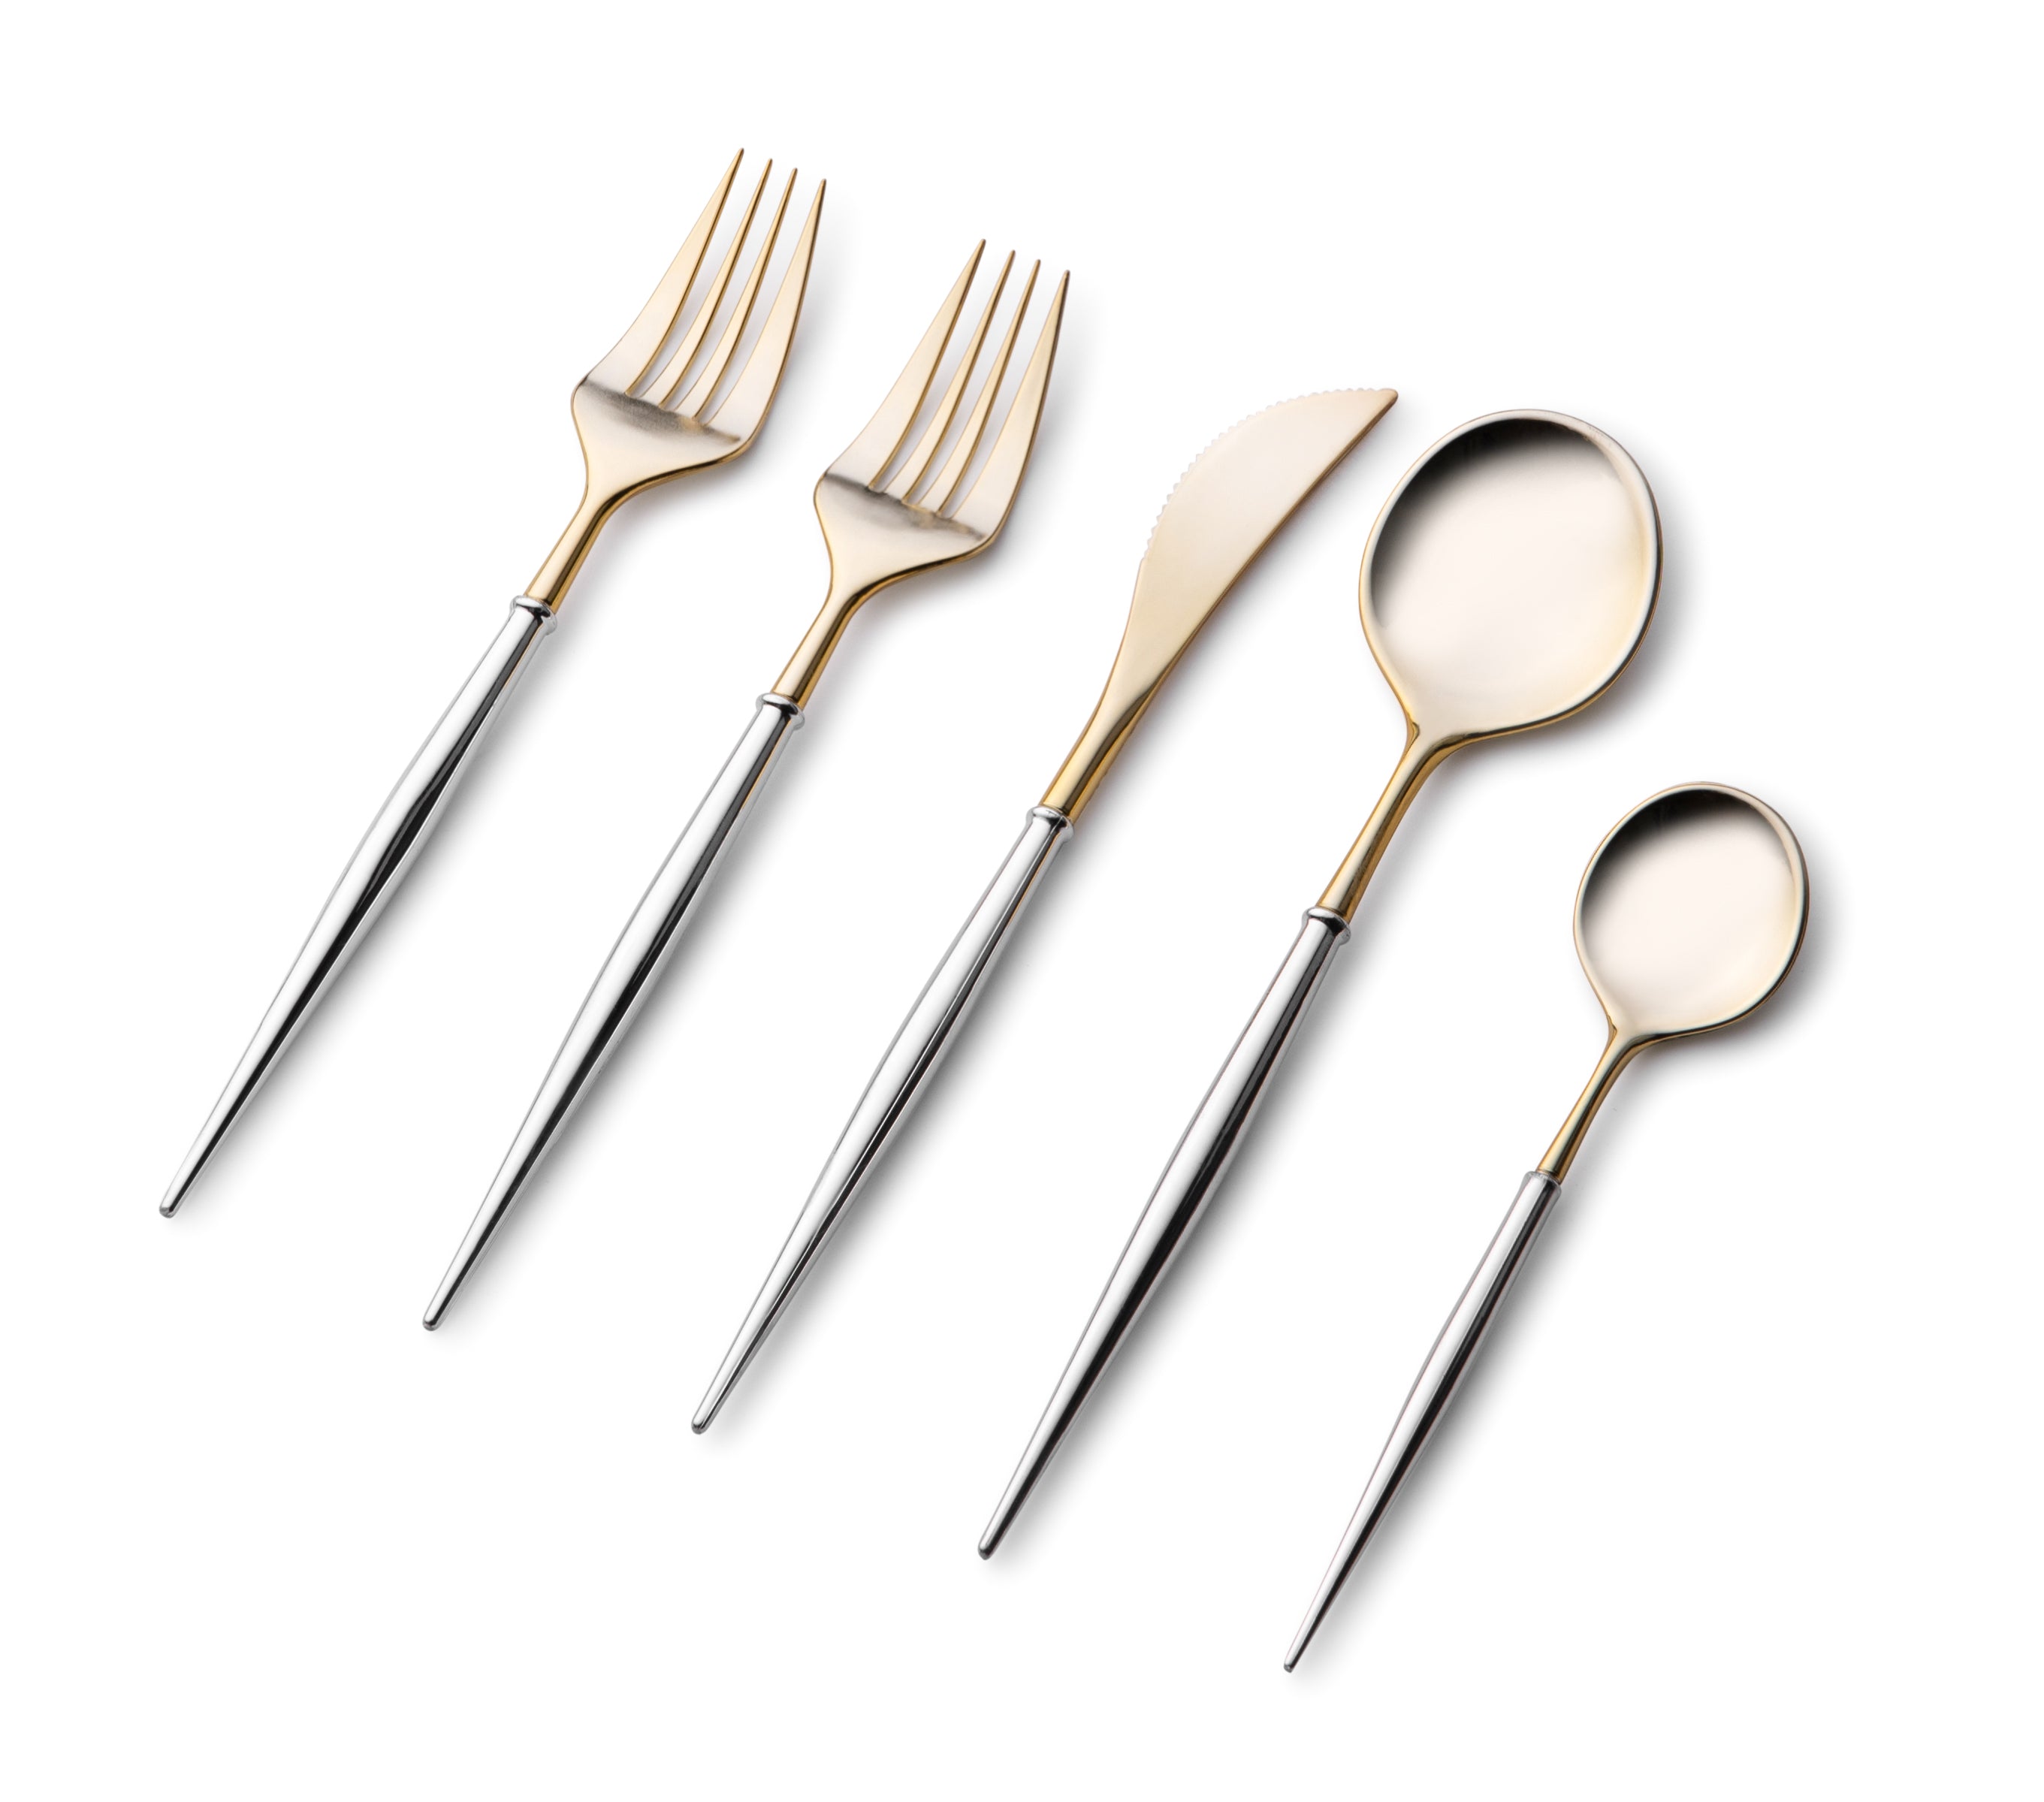 Black & Gold Plastic Cutlery Set for 8